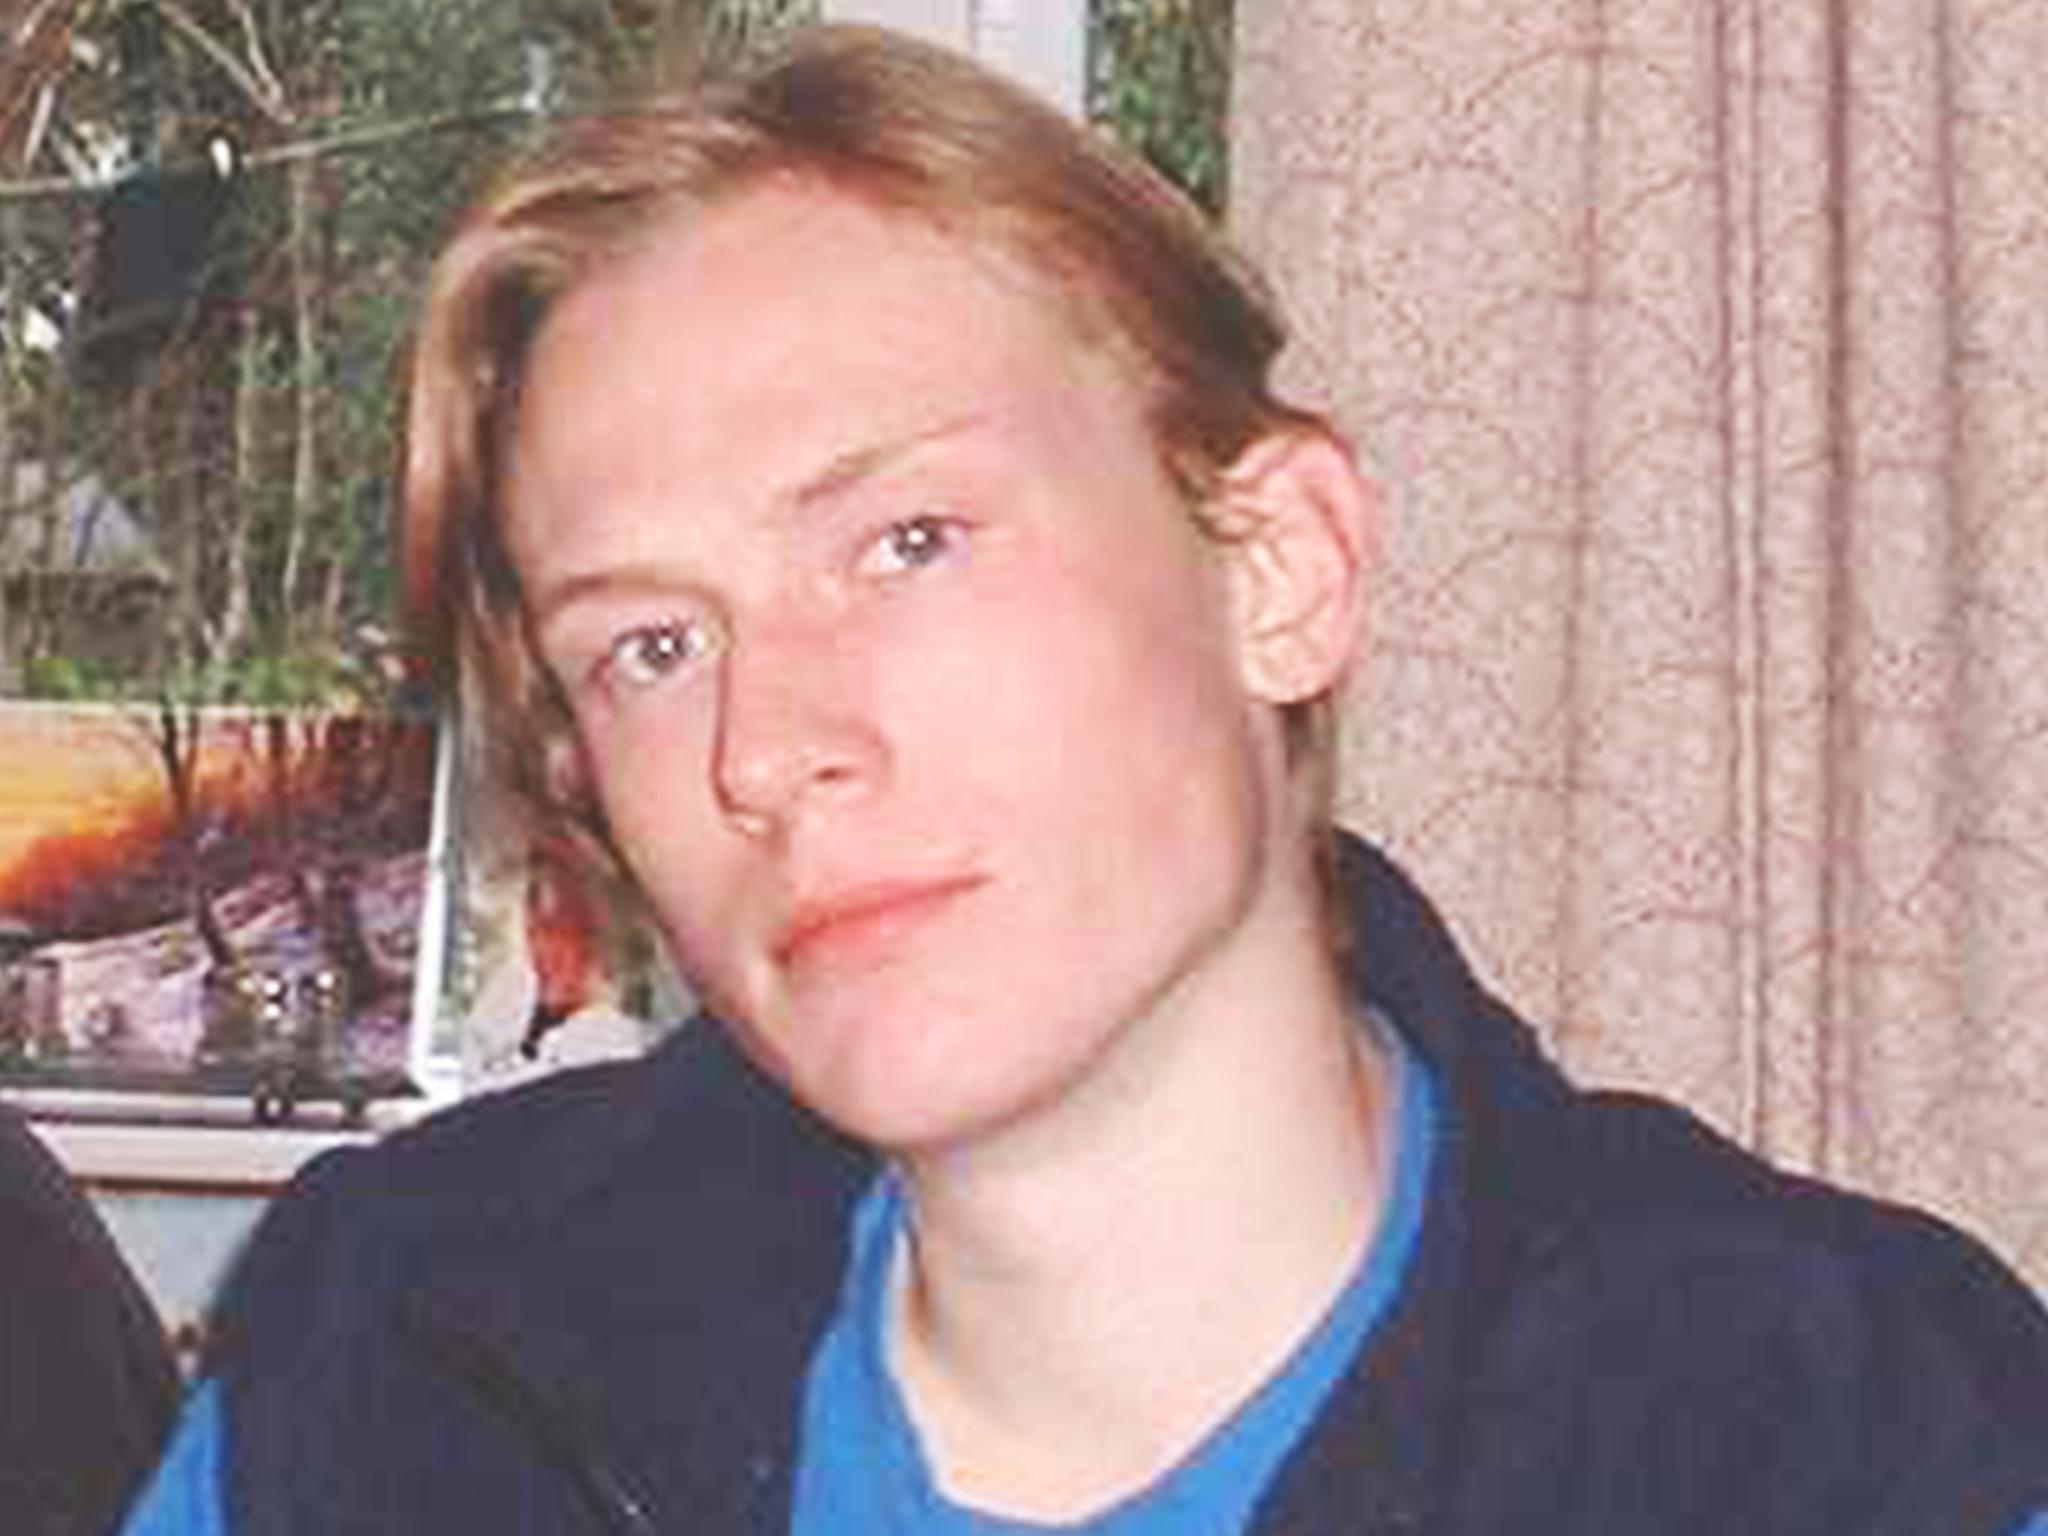 Roland Humphries, who died of a heroin overdose aged 23 in 2003